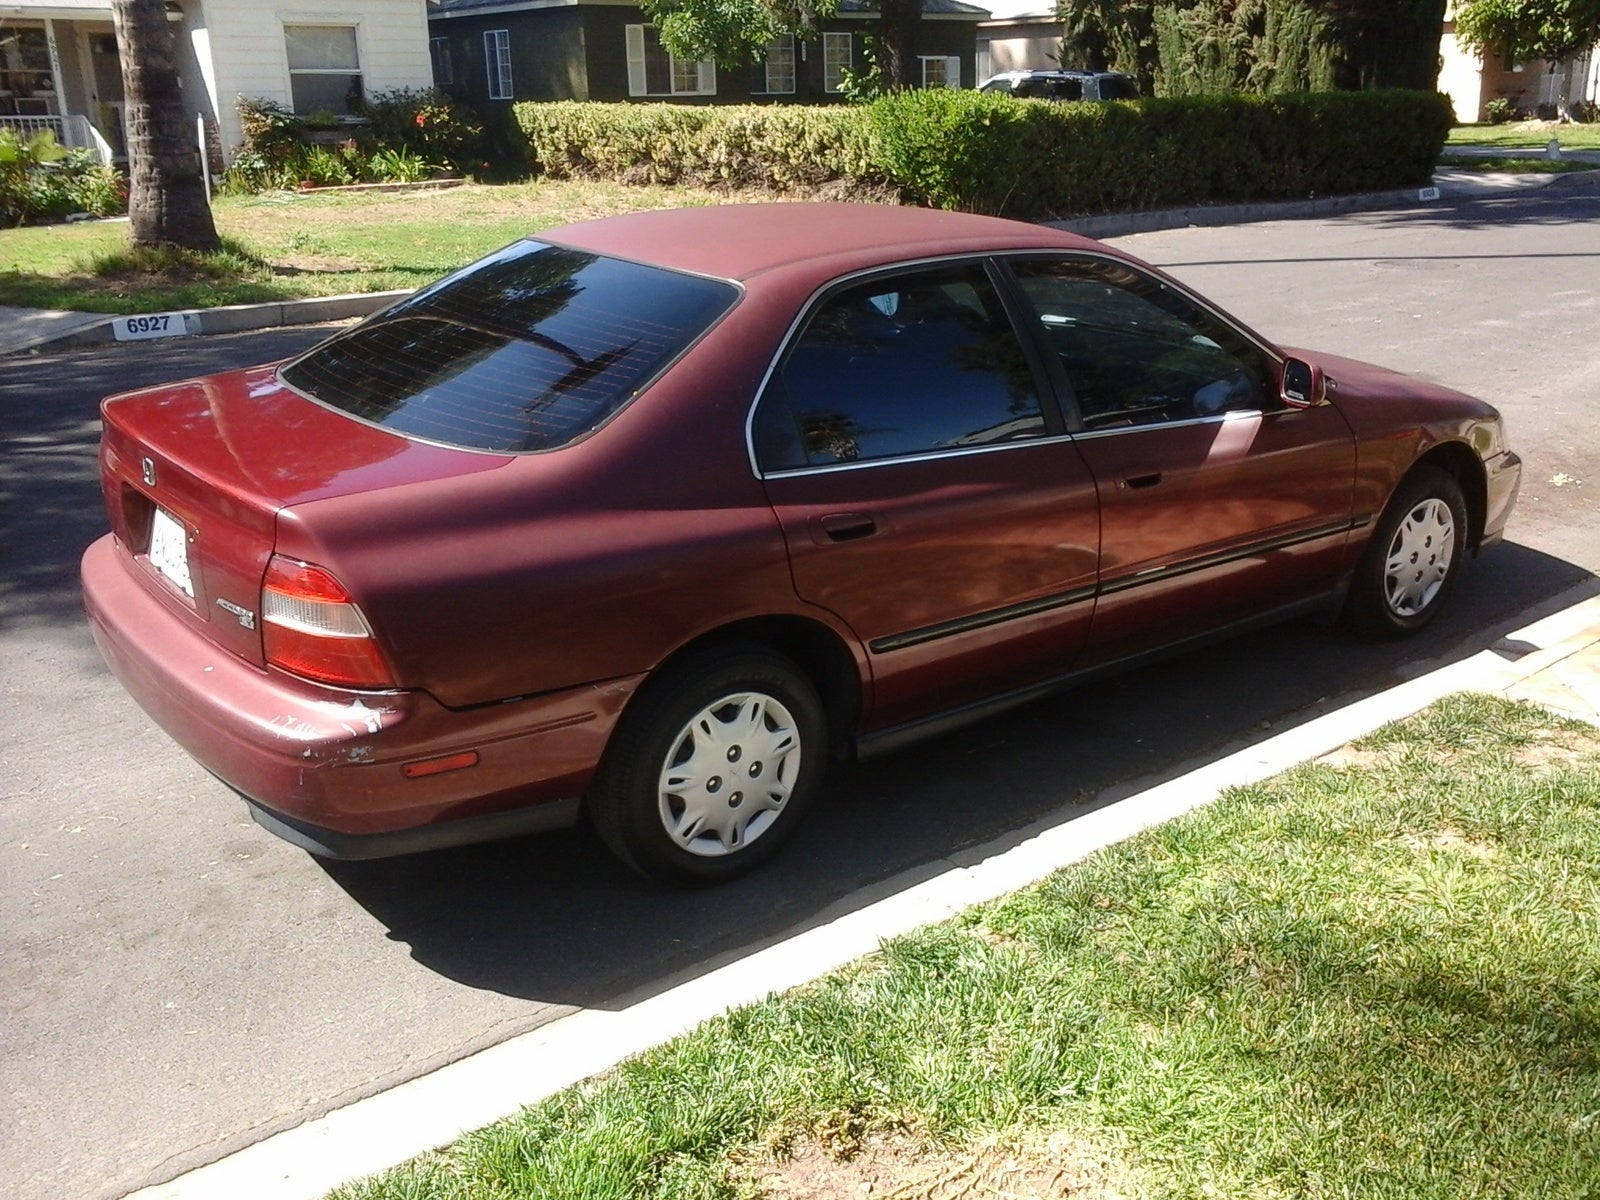 Get 1995 honda accord values, consumer reviews, safety ratings, and find ca...